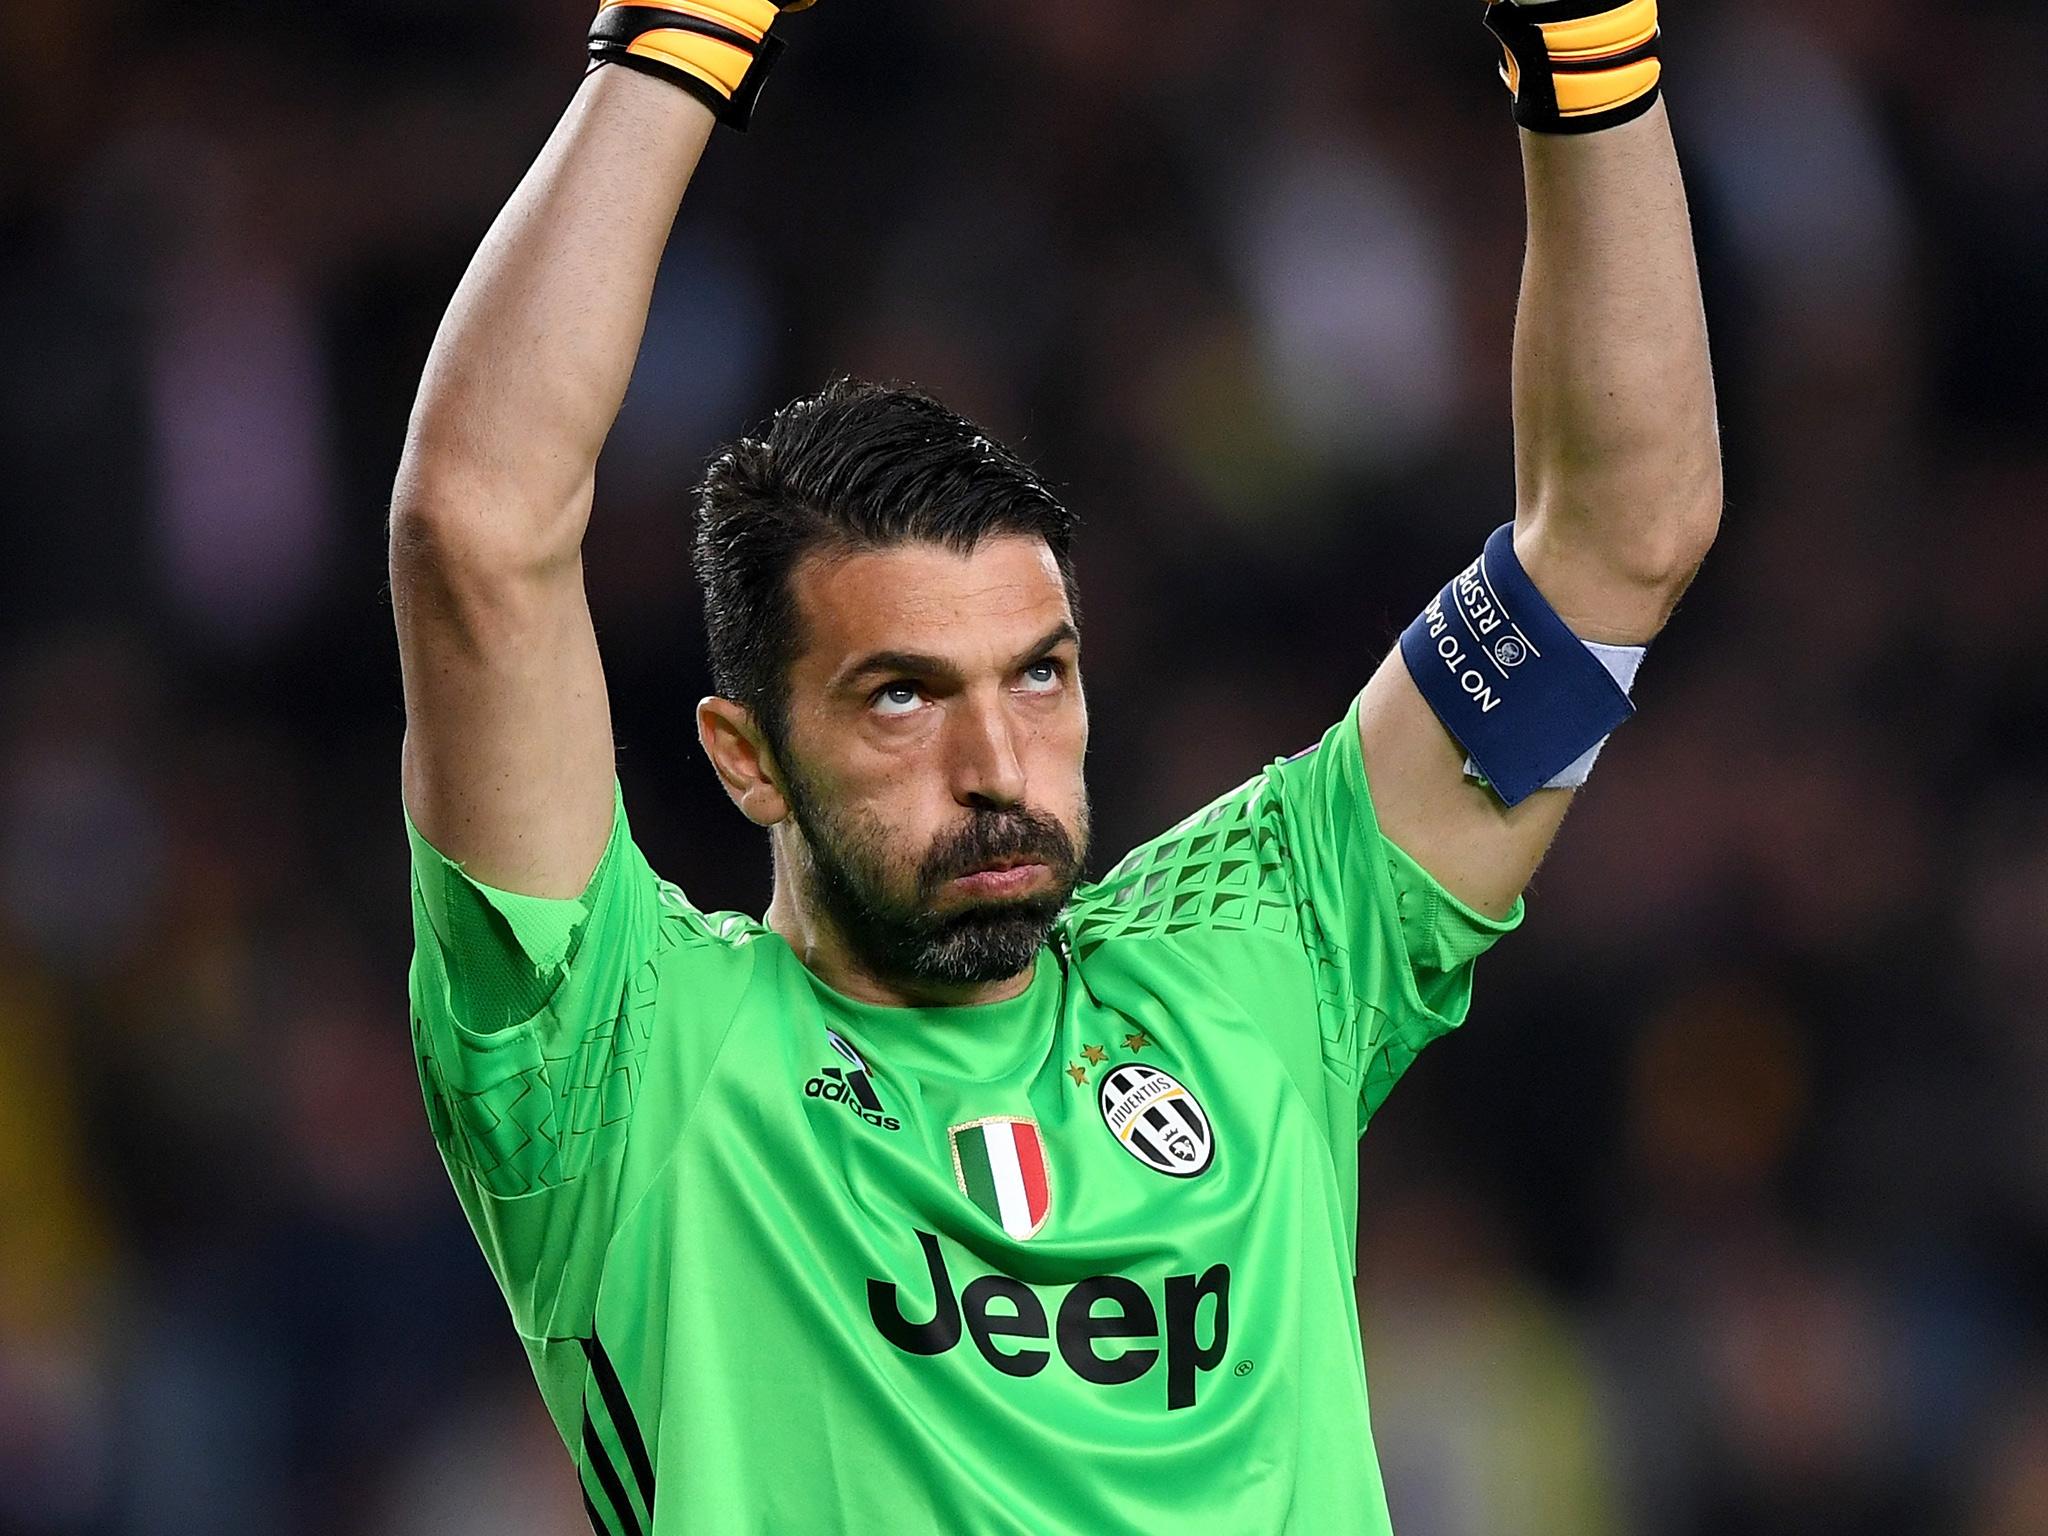 &#13;
Buffon thinks Juventus can go on and win the competition (Getty)&#13;